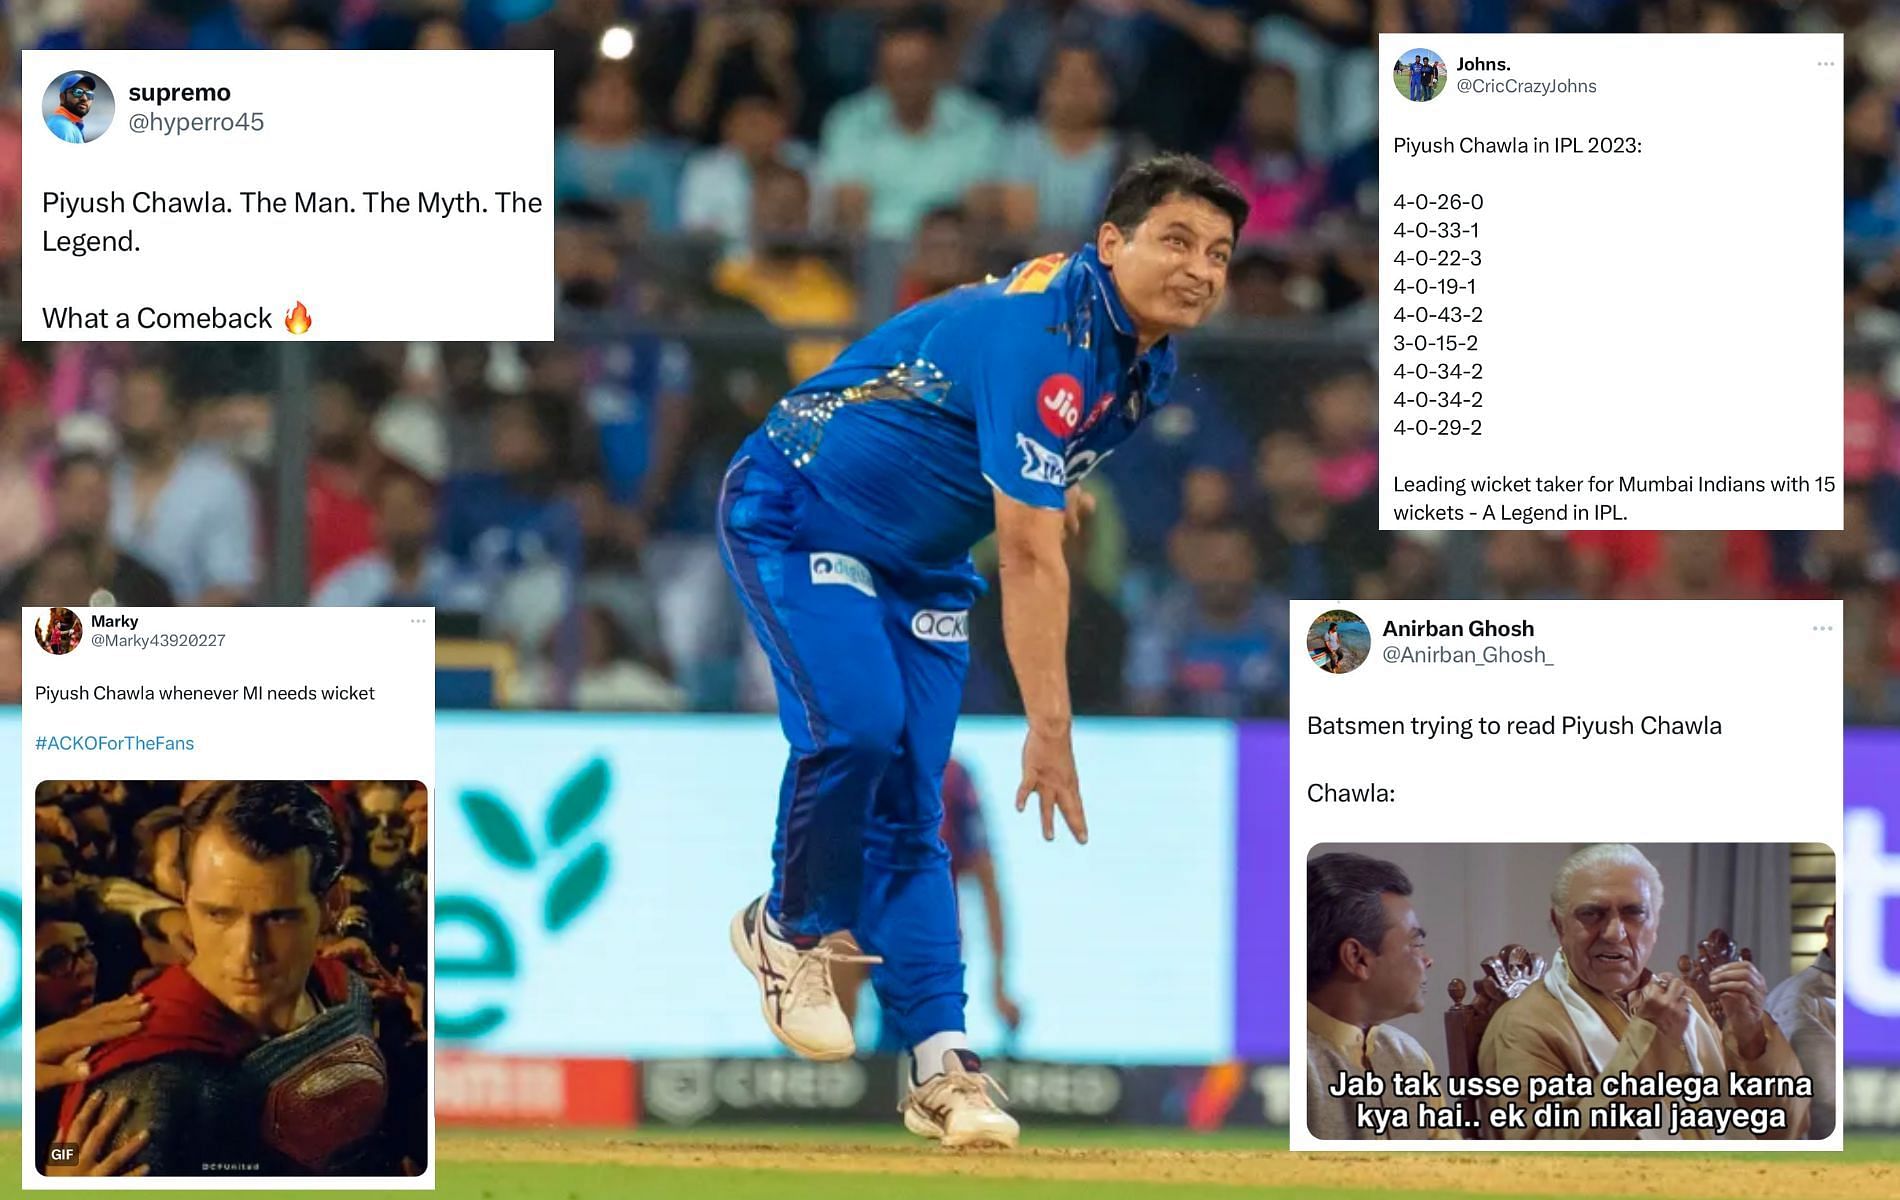 Piyush Chawla has been the top performer with the ball for MI in IPL 2023. (Pic: IPLT20.com)